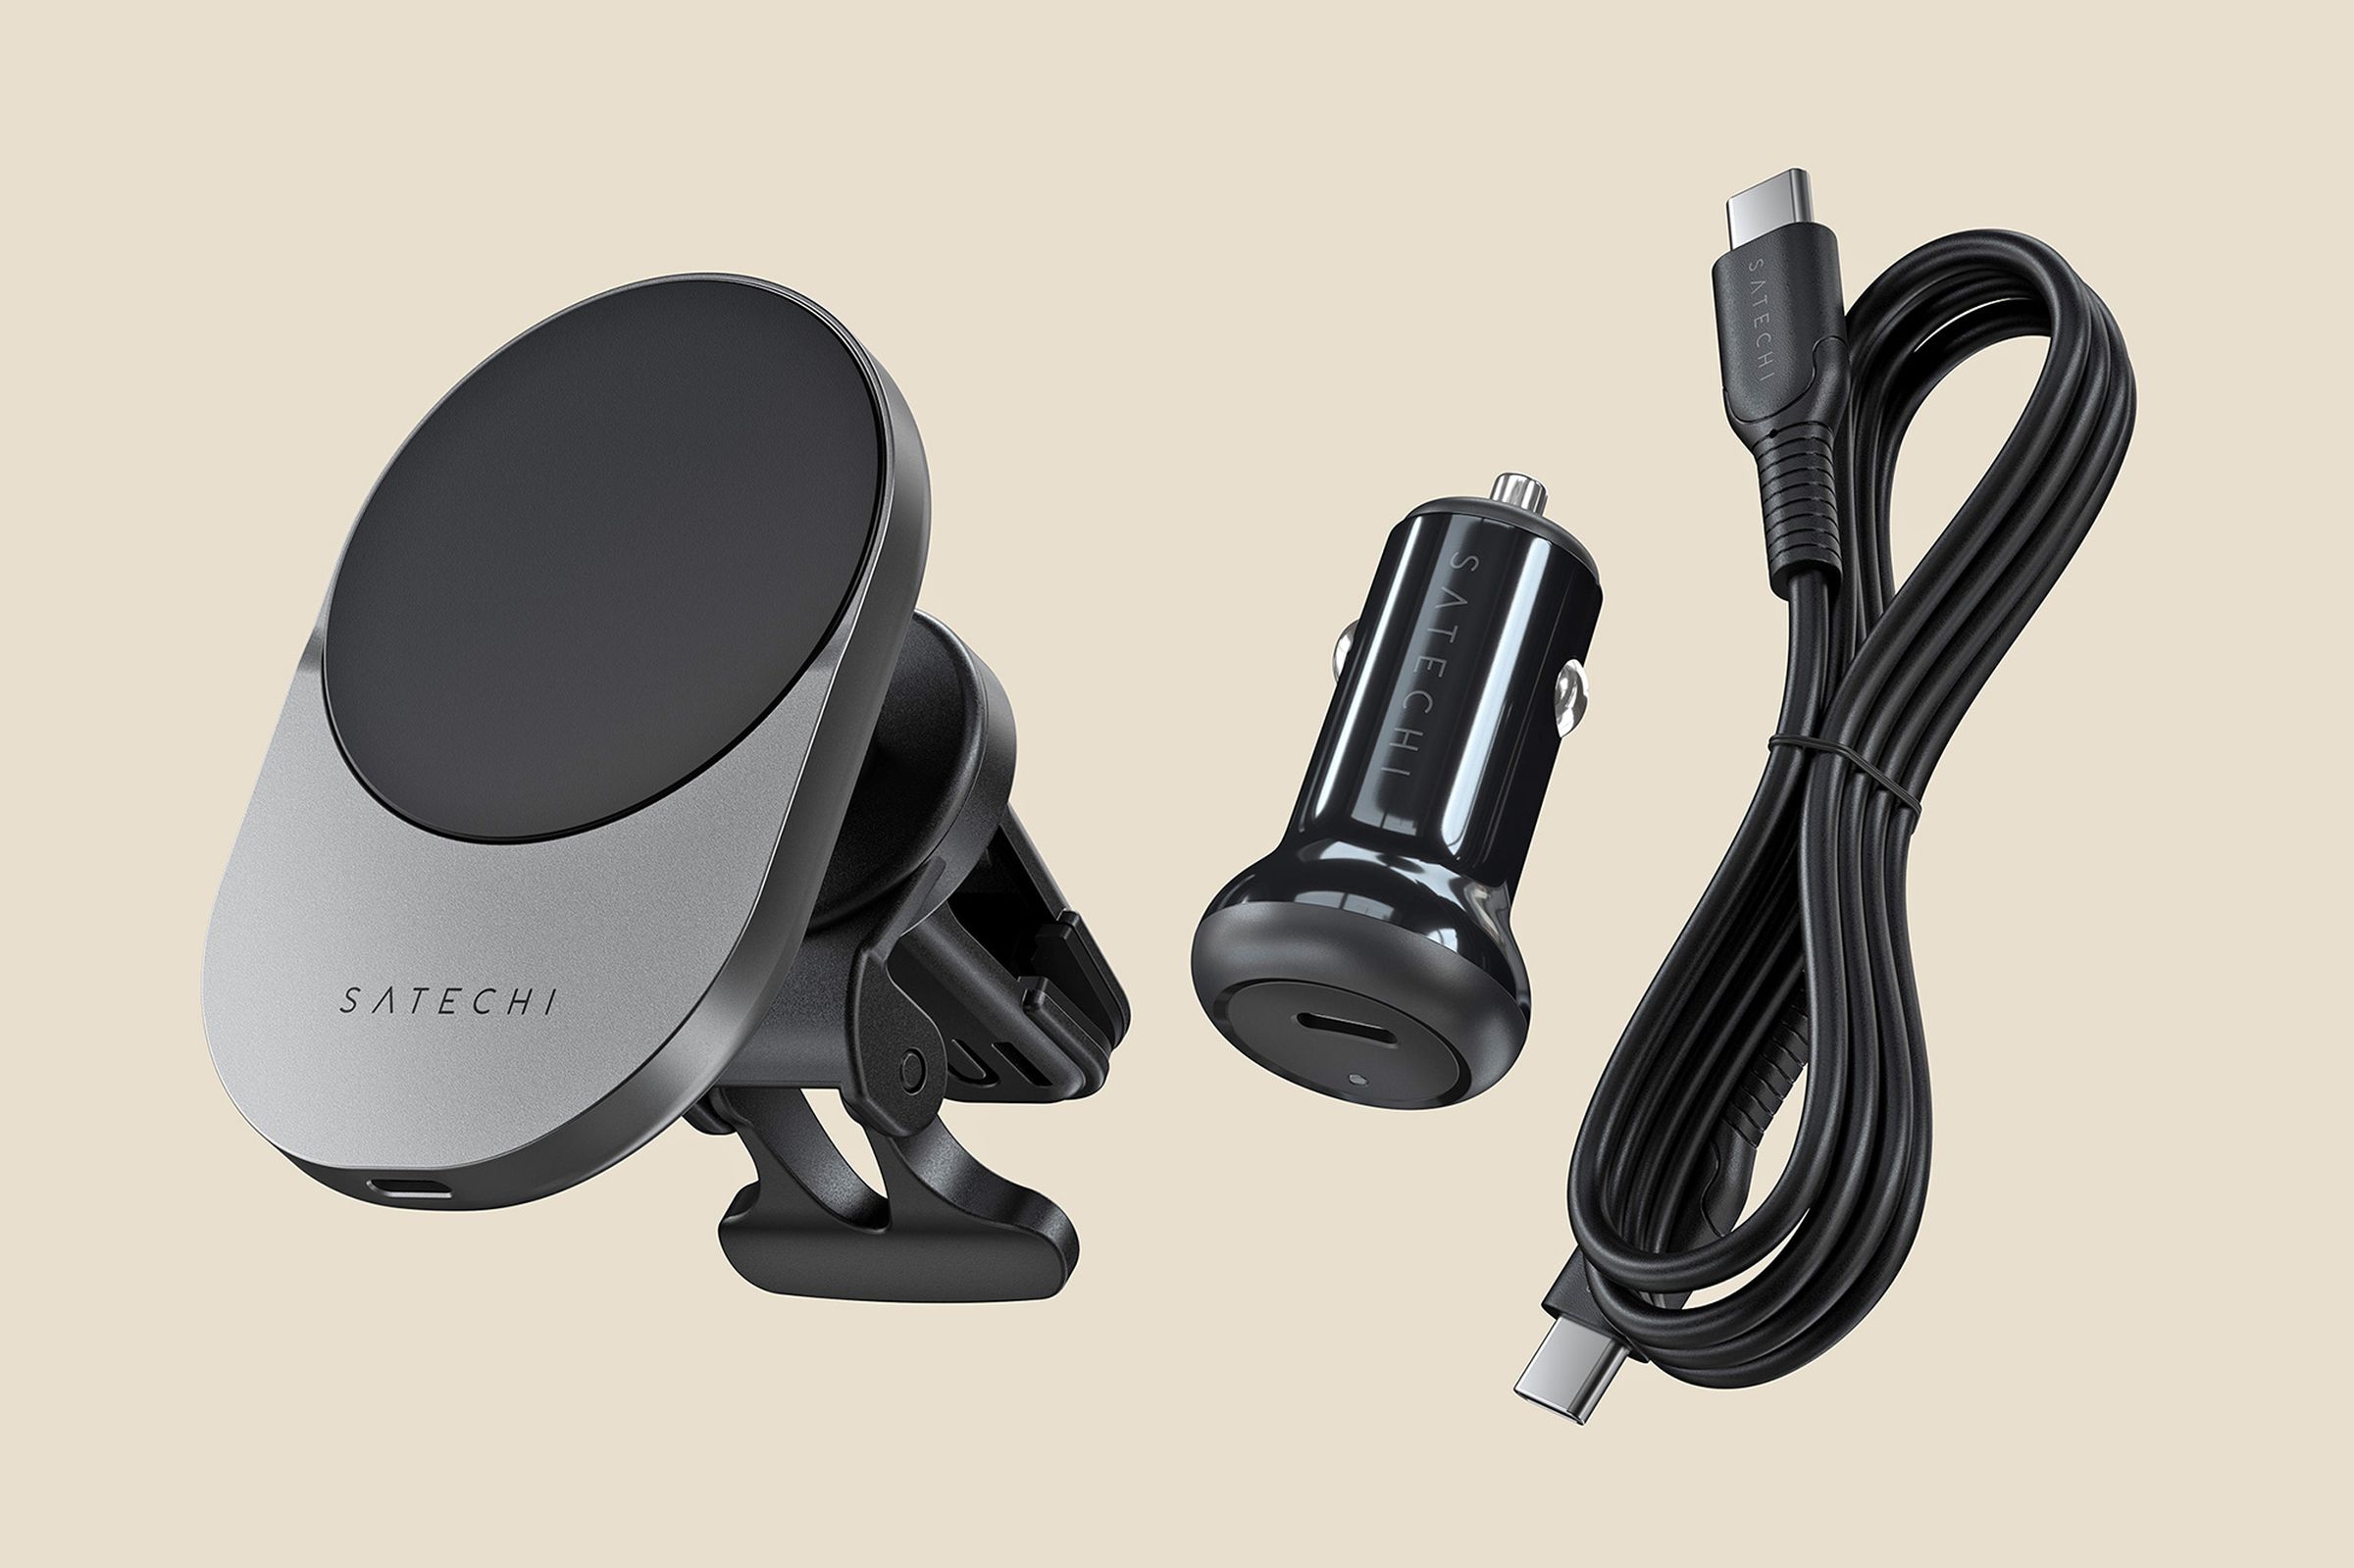 The Satechi Qi2 Wireless Car Charger and its included accessories.